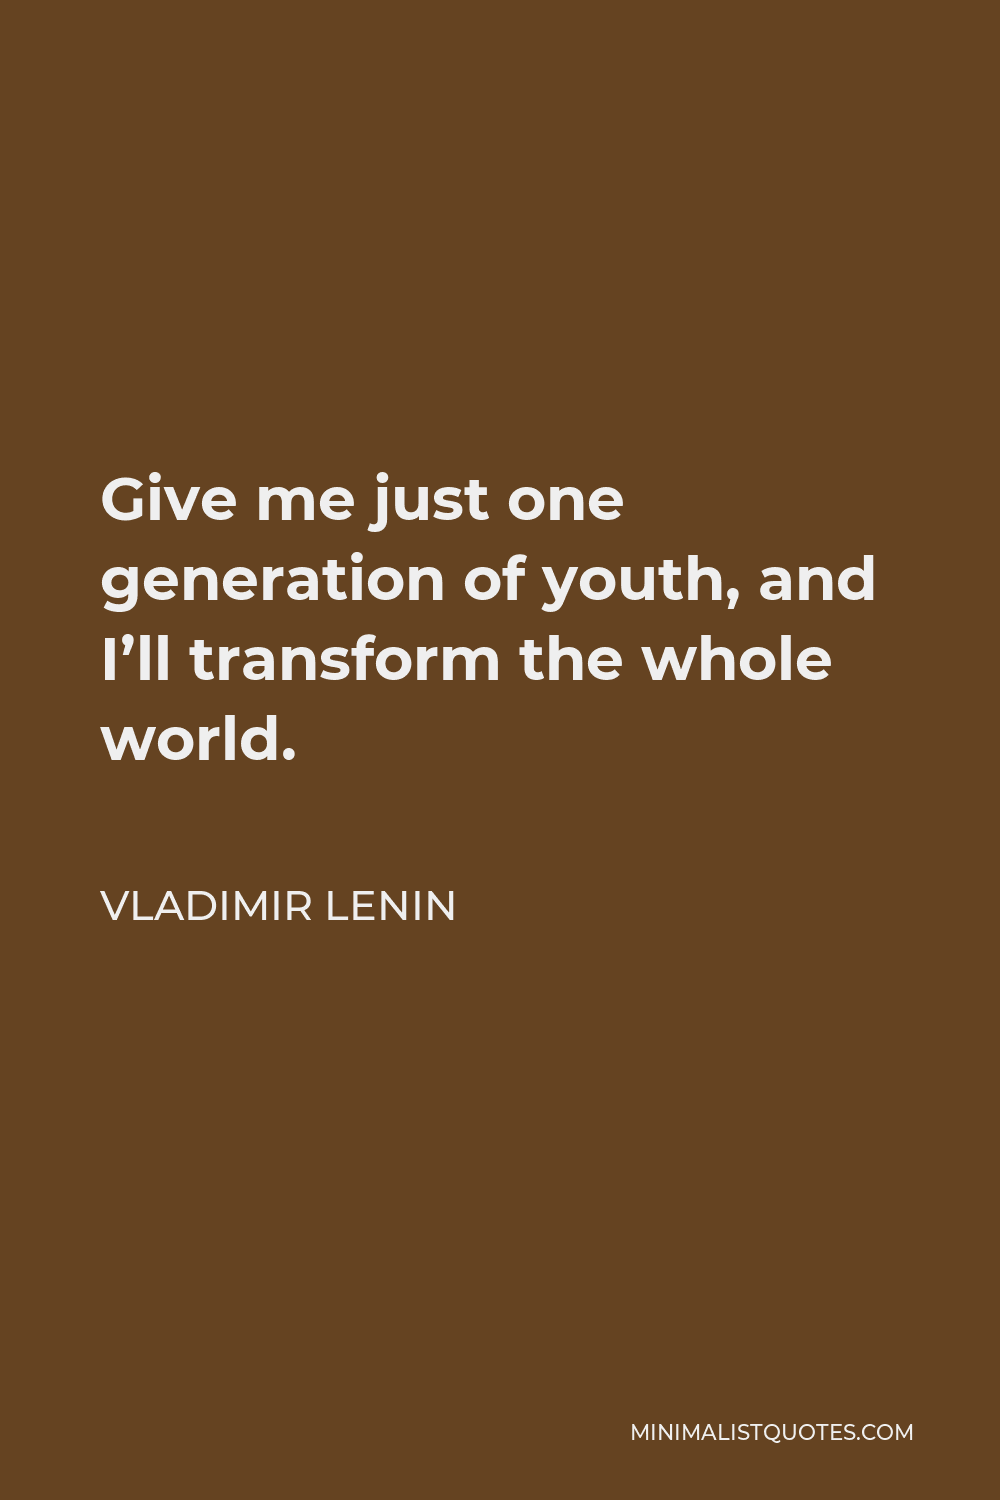 Vladimir Lenin Quote - Give me just one generation of youth, and I’ll transform the whole world.